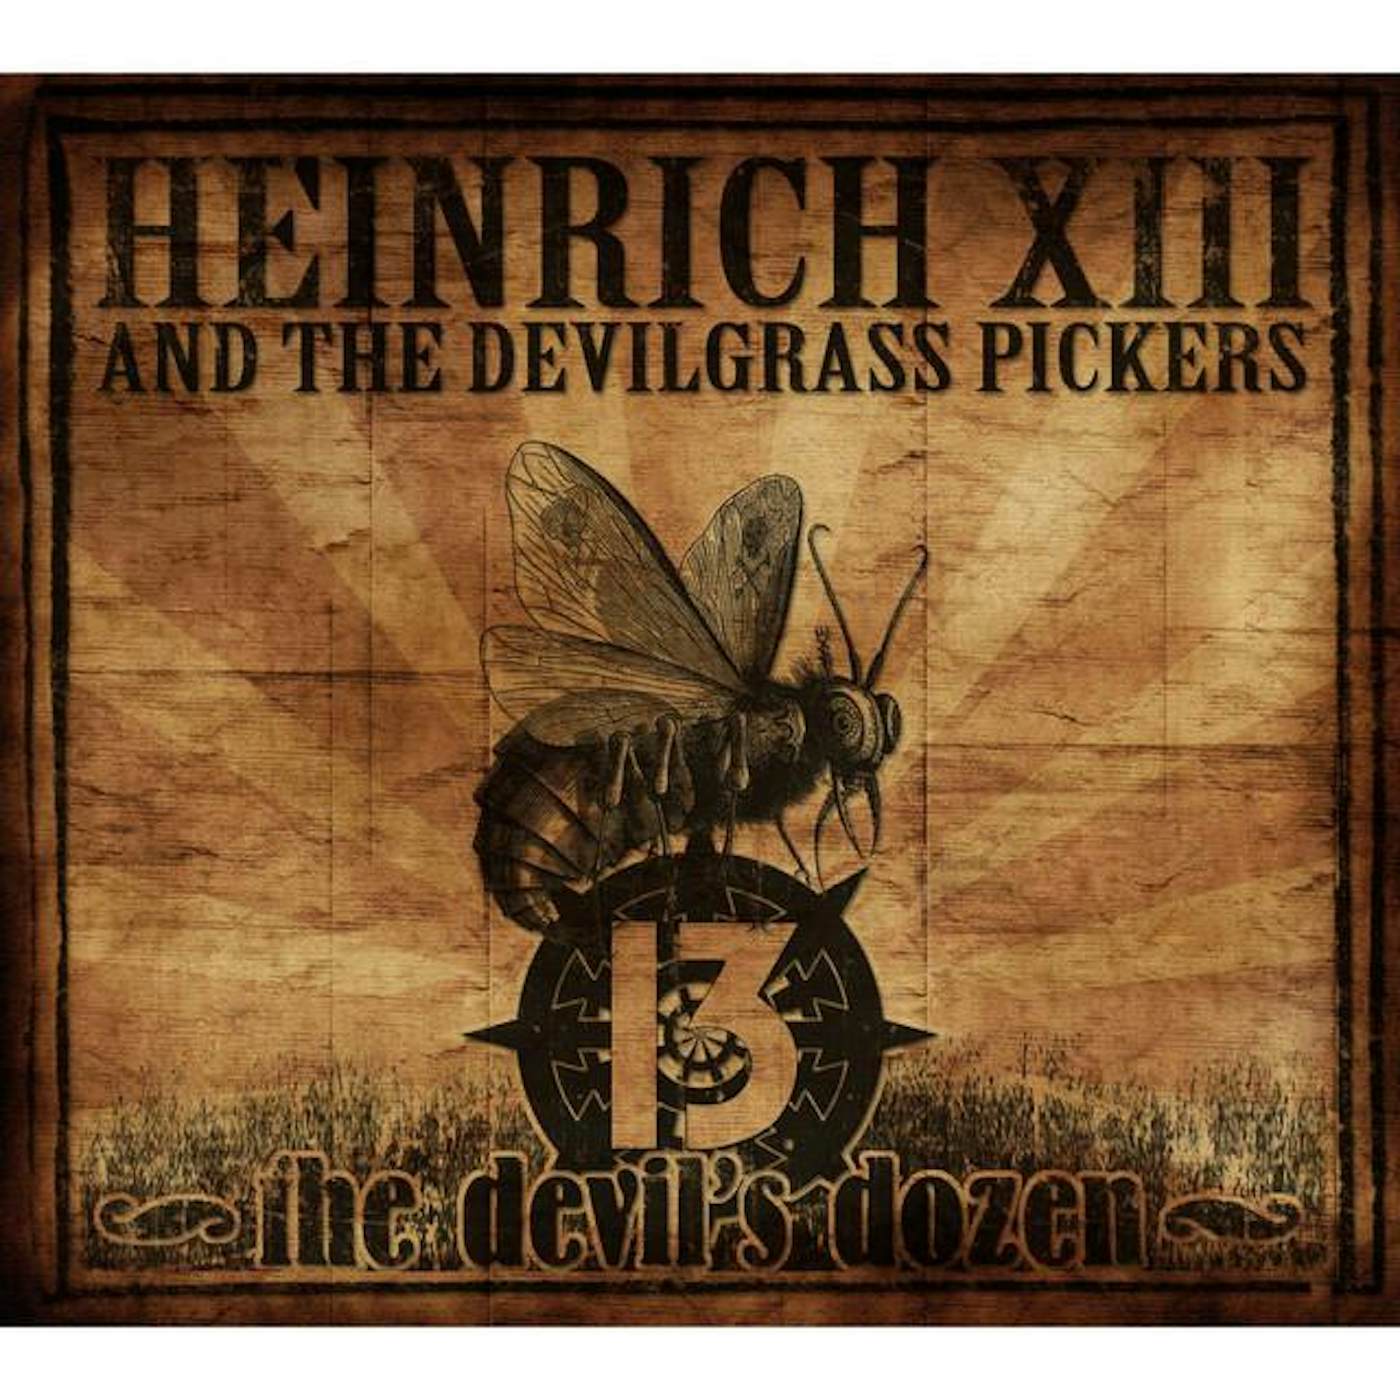 Heinrich XIII and the Devilgrass Pickers